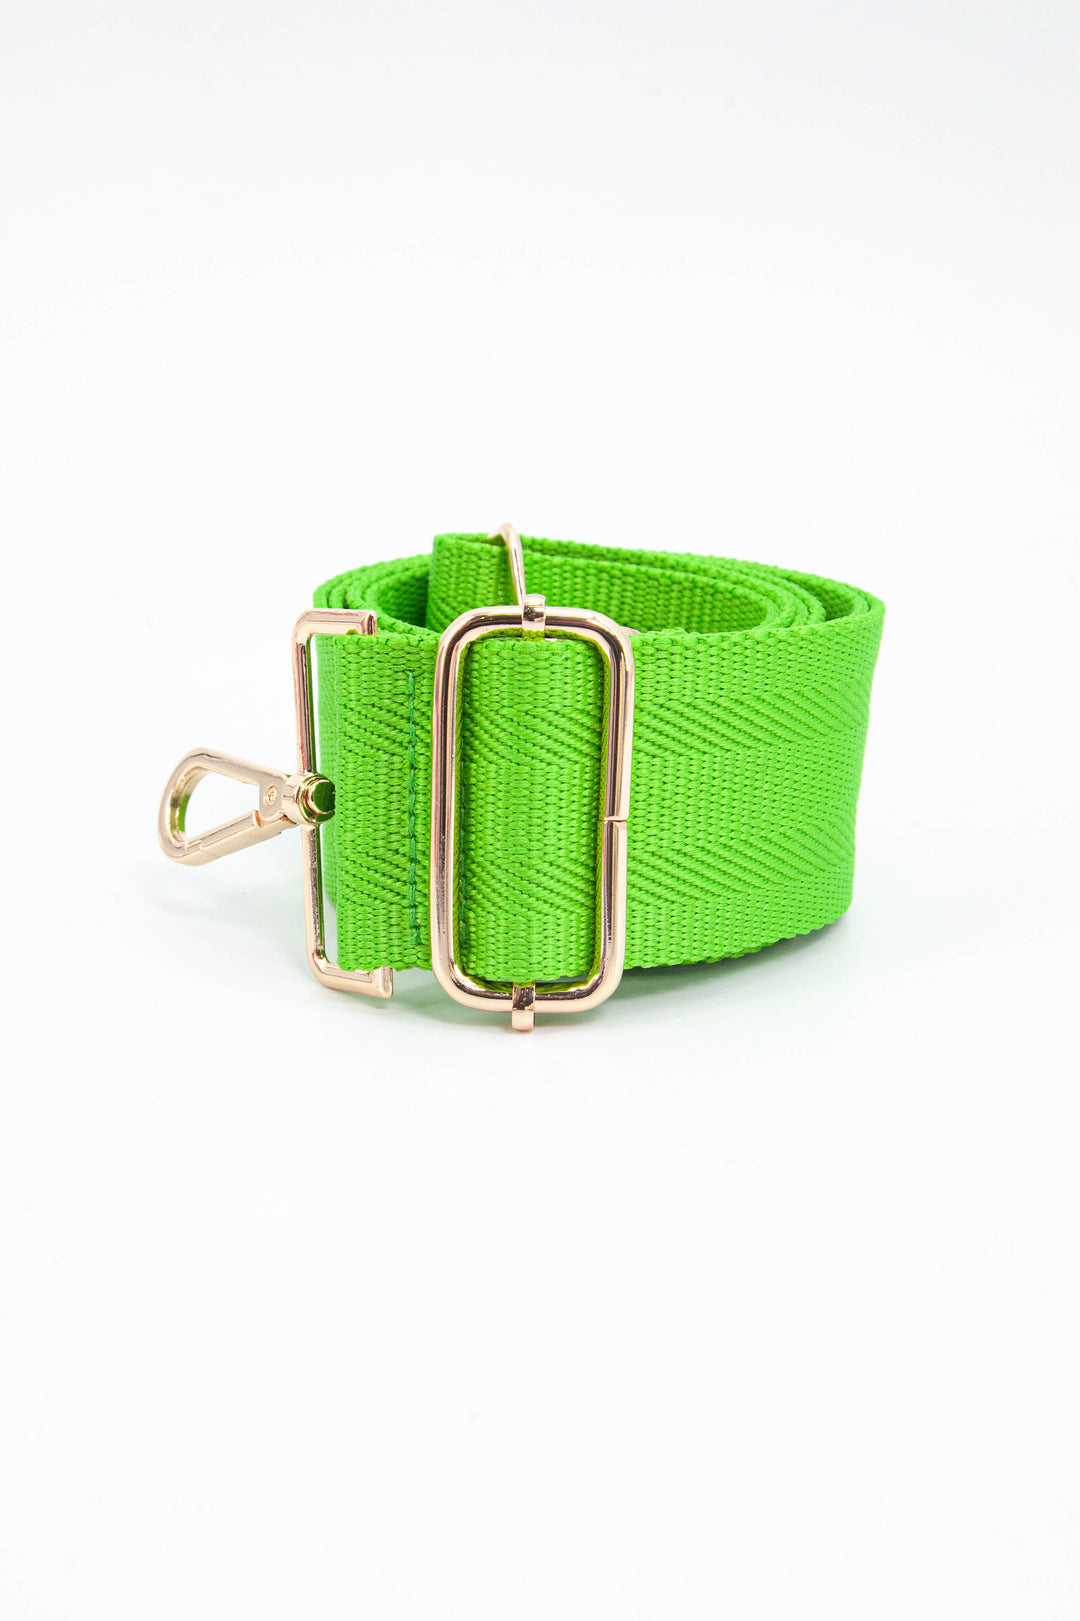 close up of the adjustable bag strap, showing the gold buckle and clip on attachments